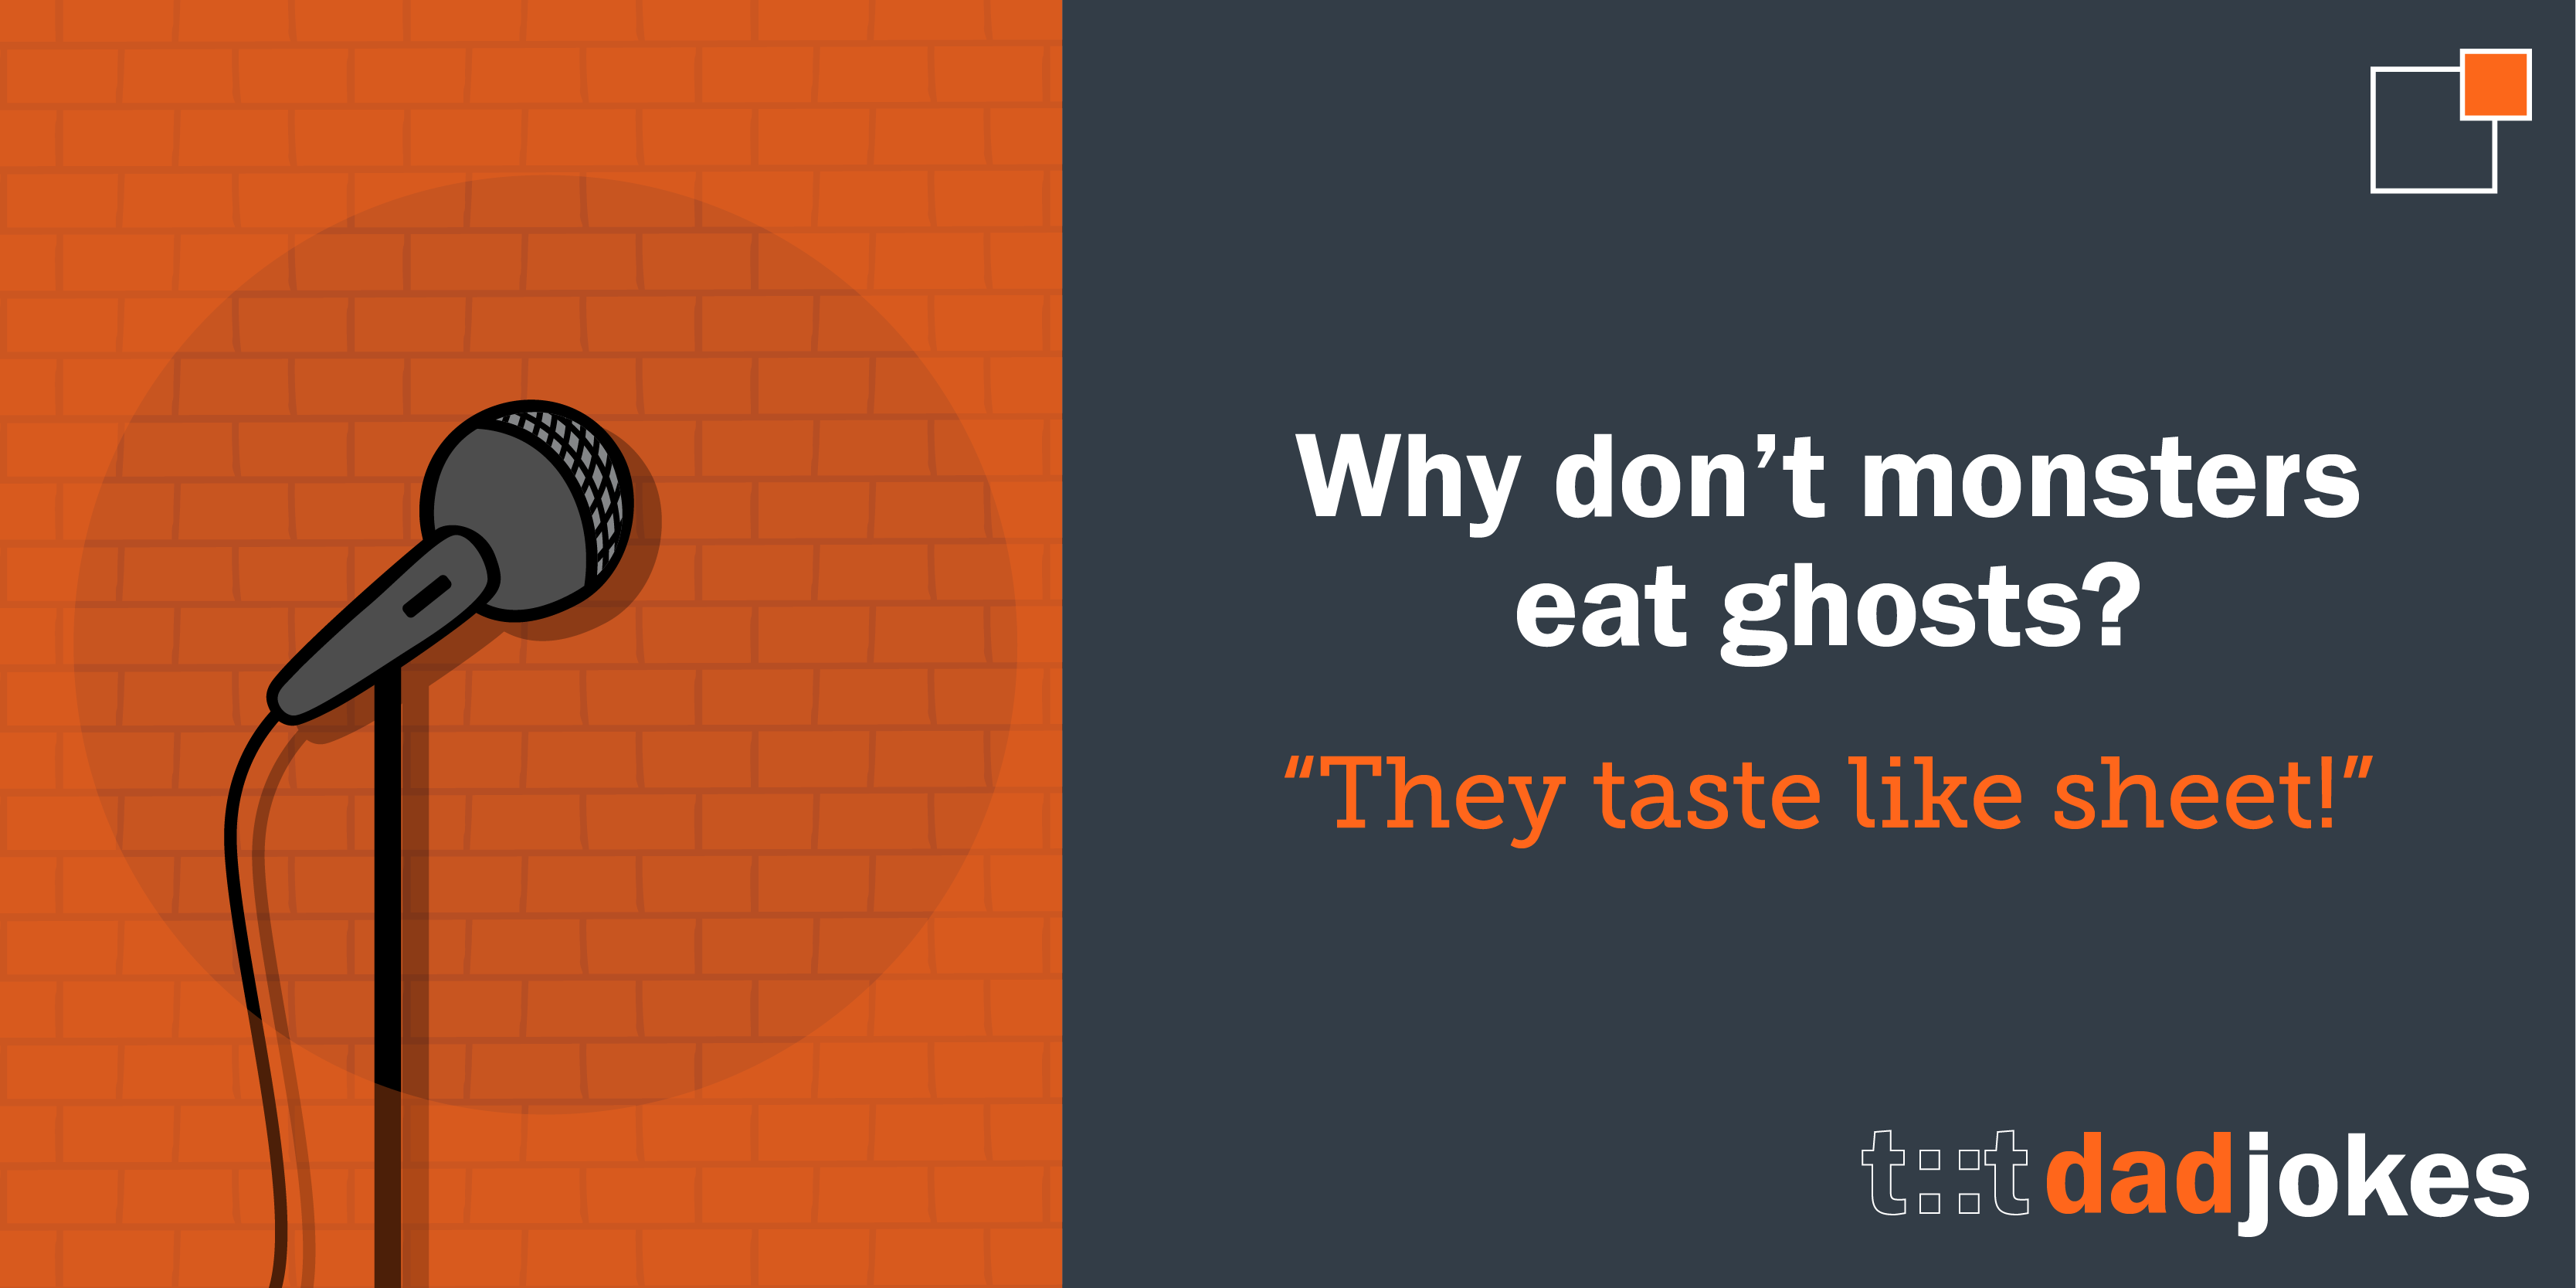 Why don’t monsters eat ghosts. They taste like sheet!